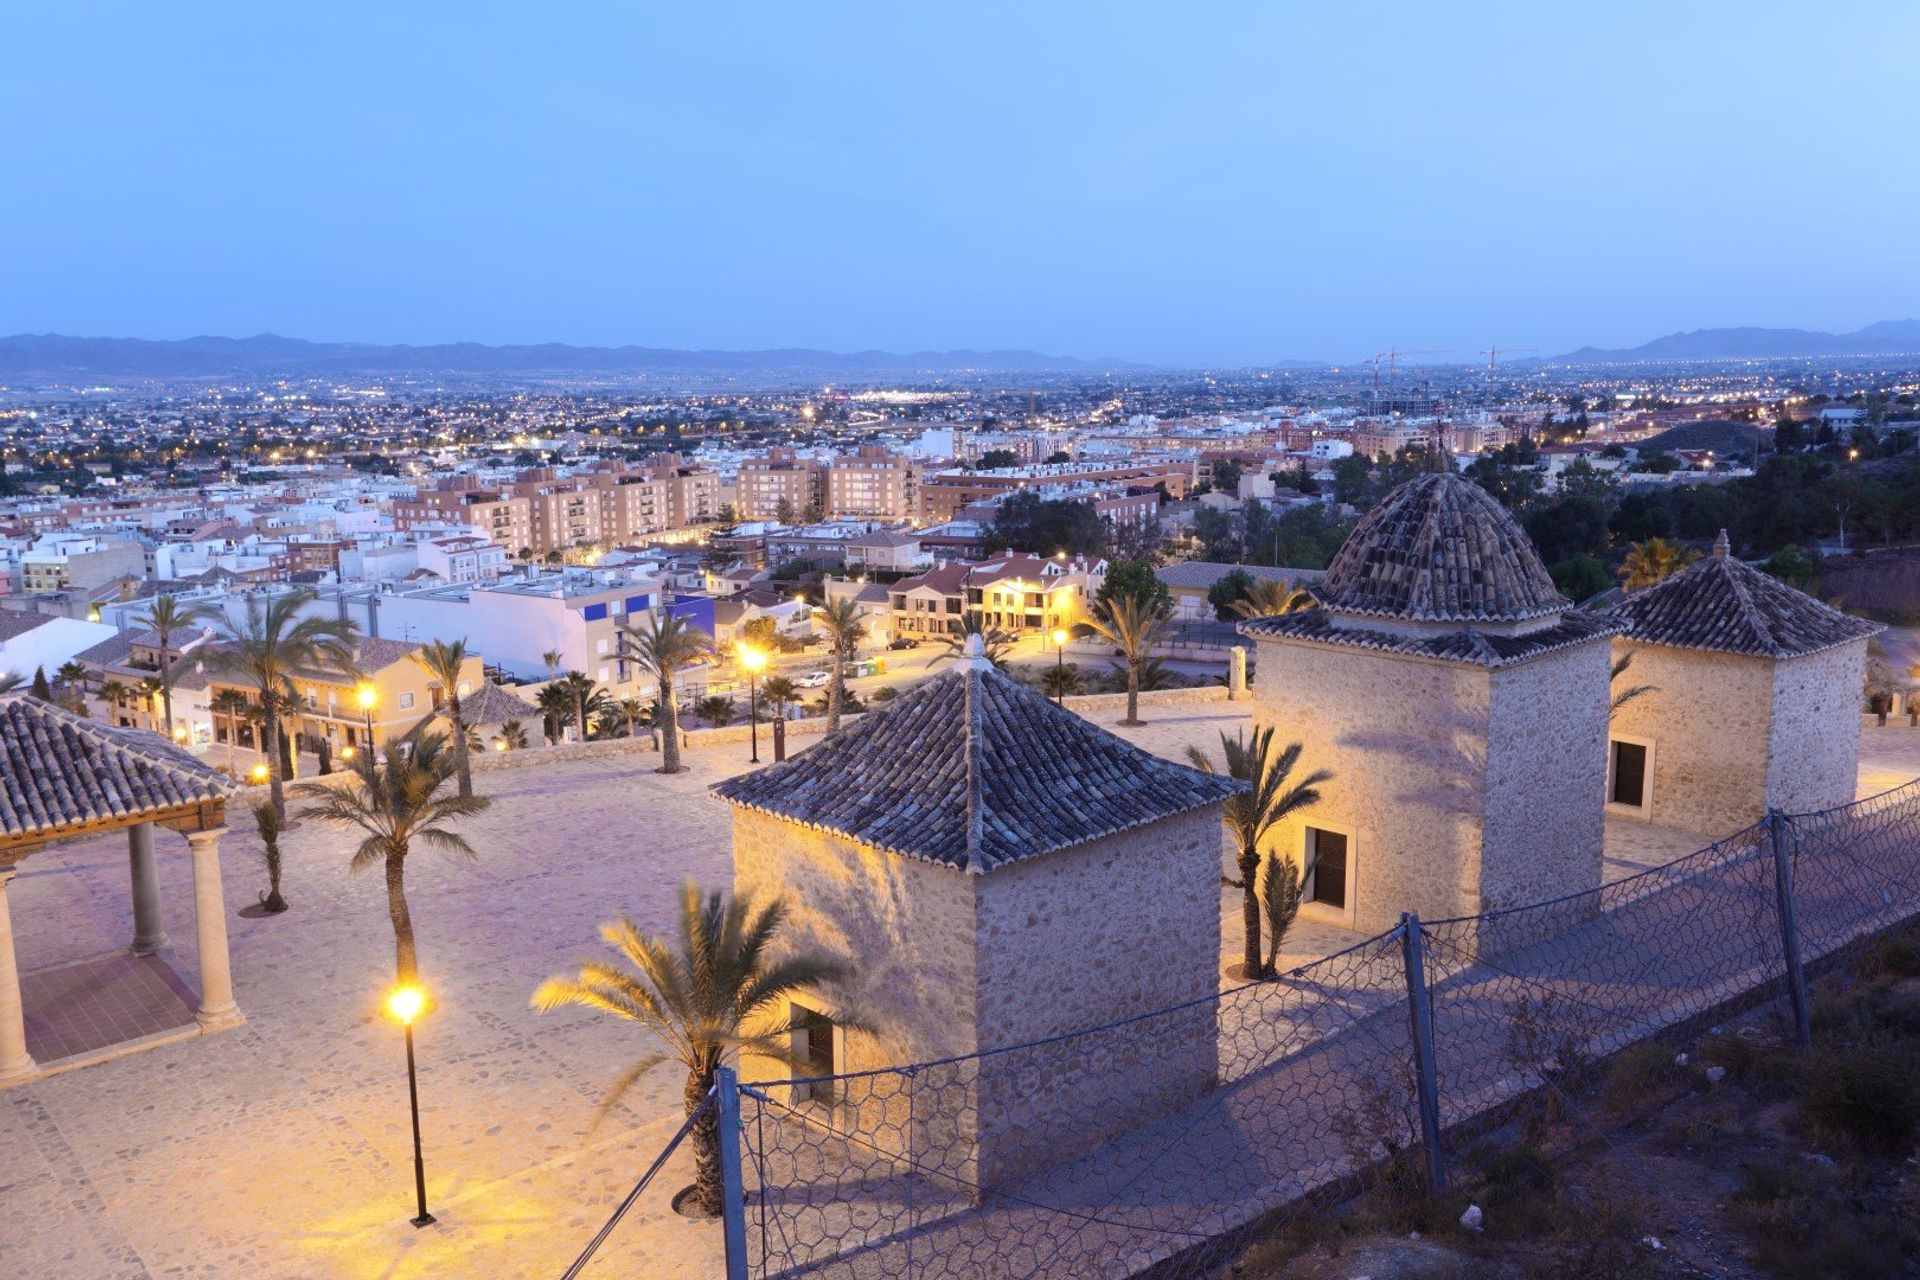 The large medieval town of Lorca is famous for its impressive Lorca Castle, known as the 'Fortress of the Sun'